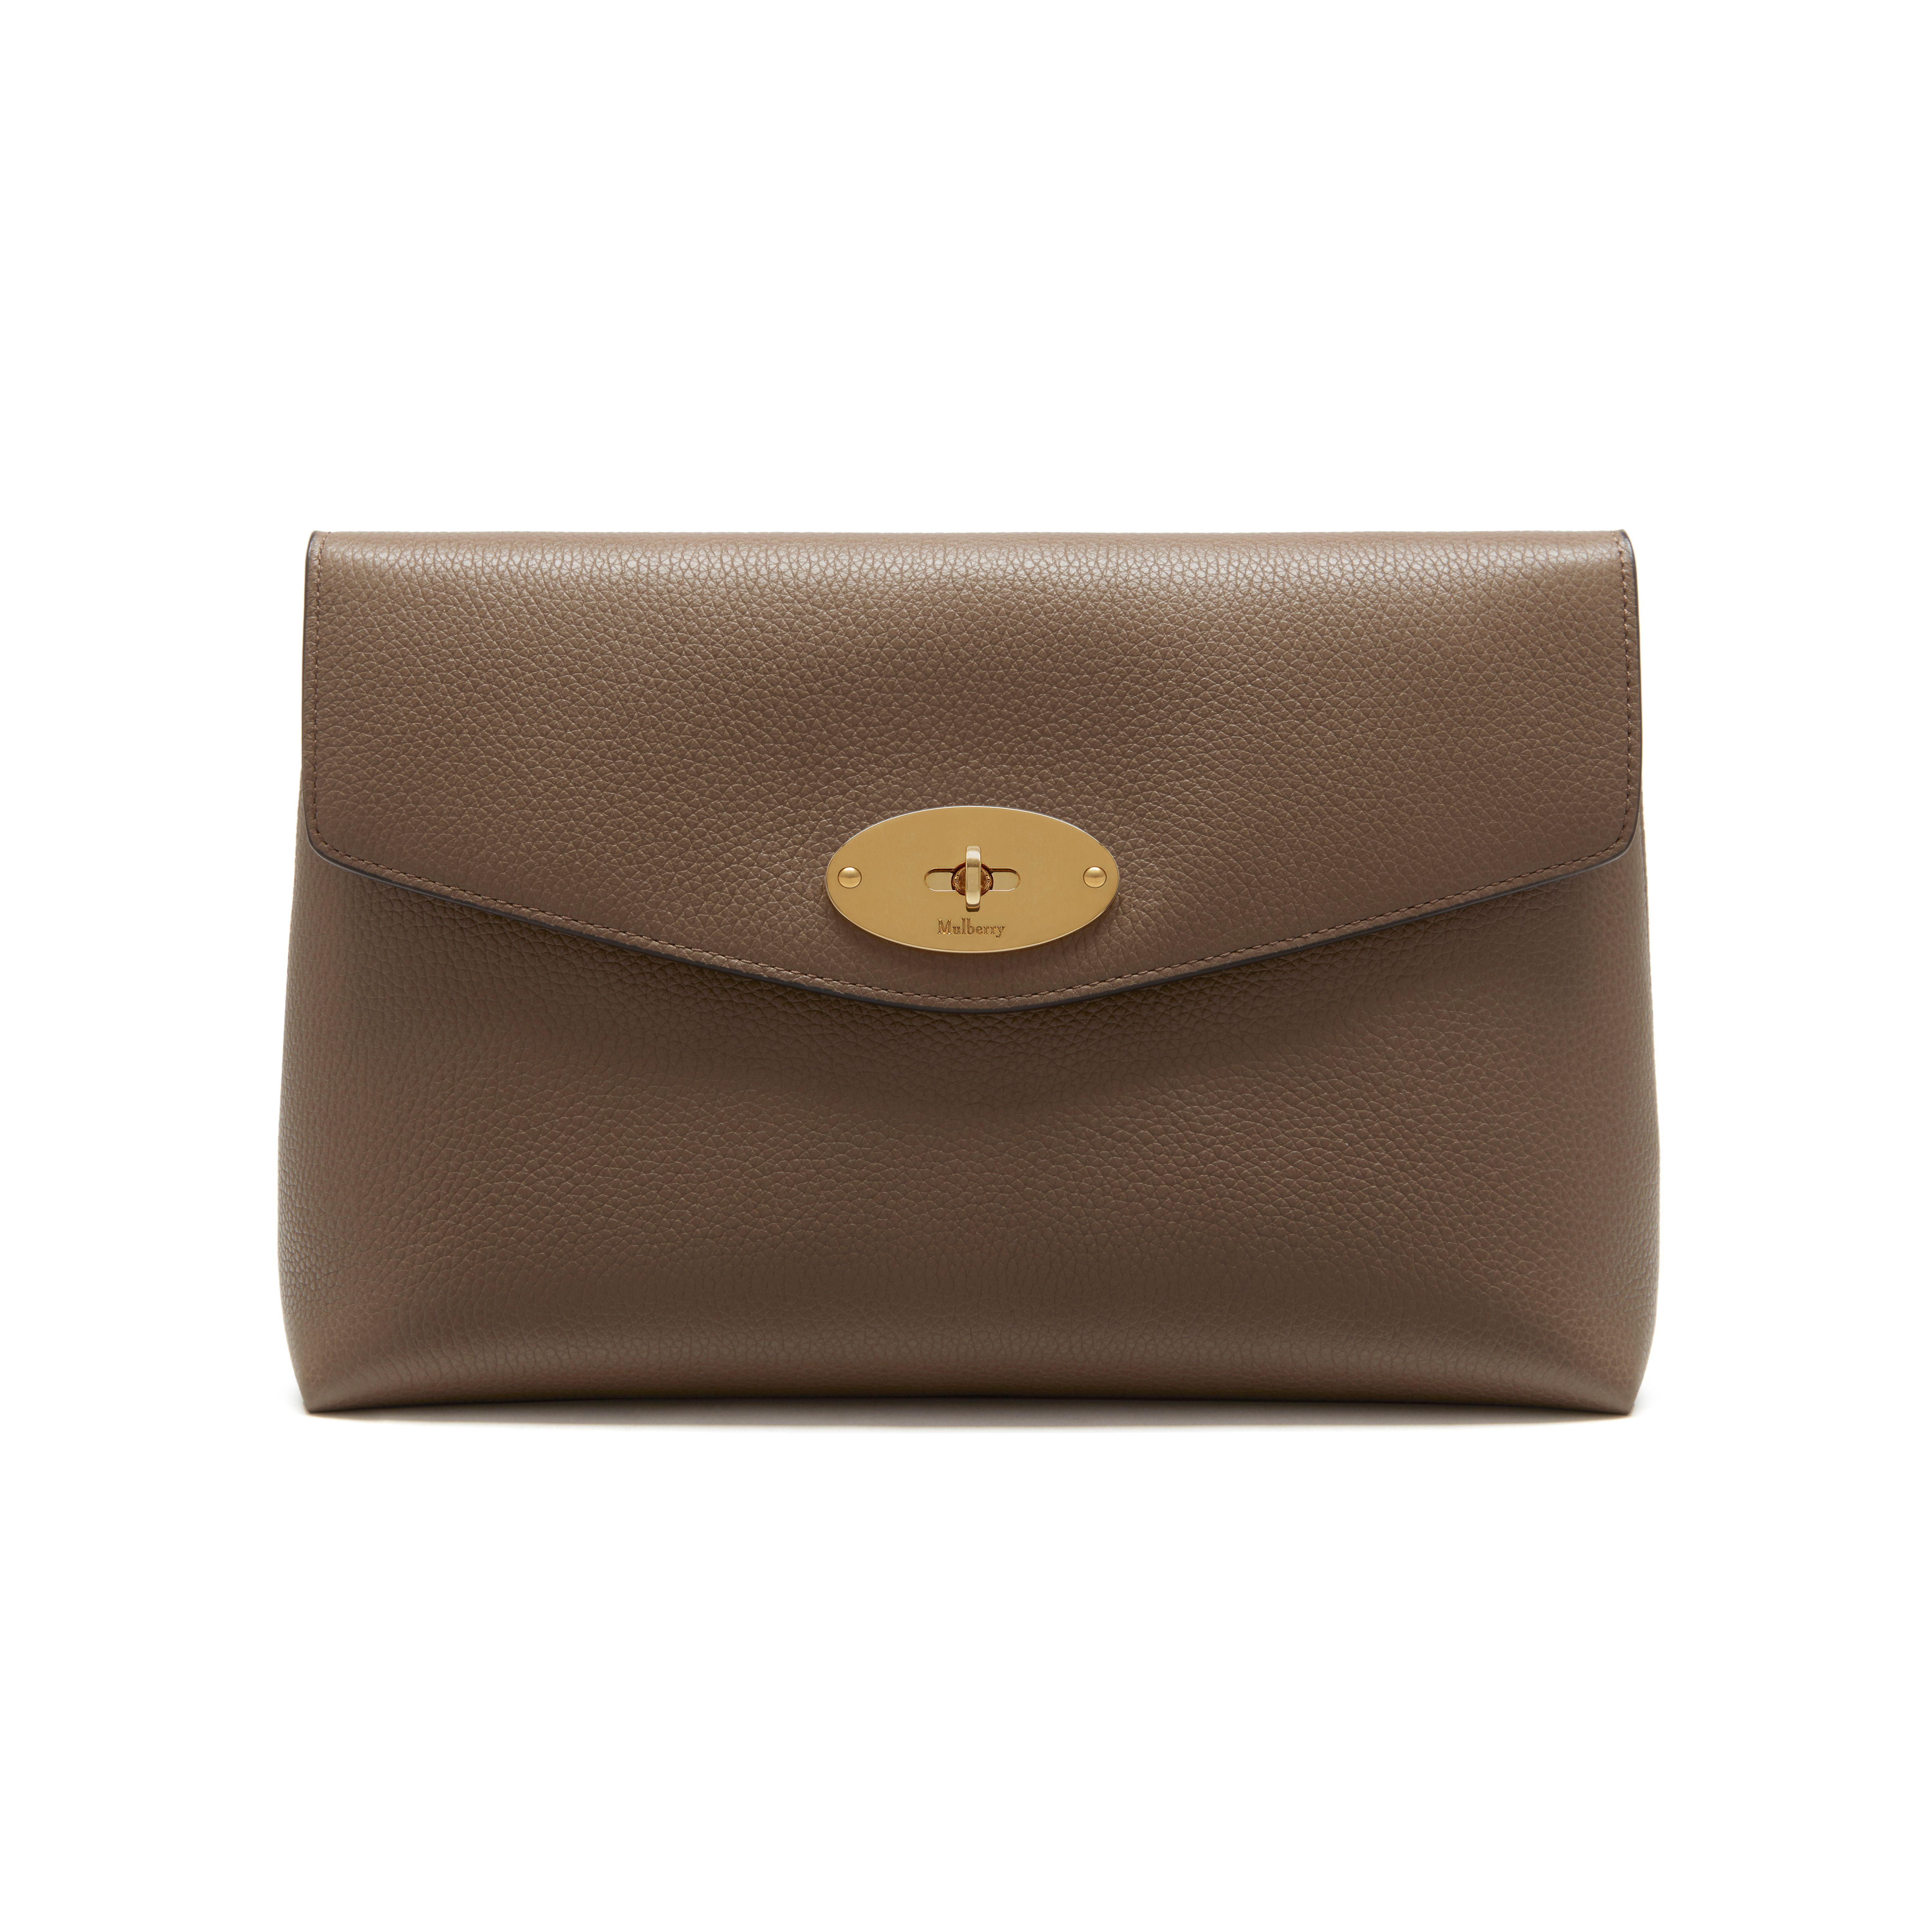 Mulberry Large Darley Cosmetic Pouch in Brown | Lyst